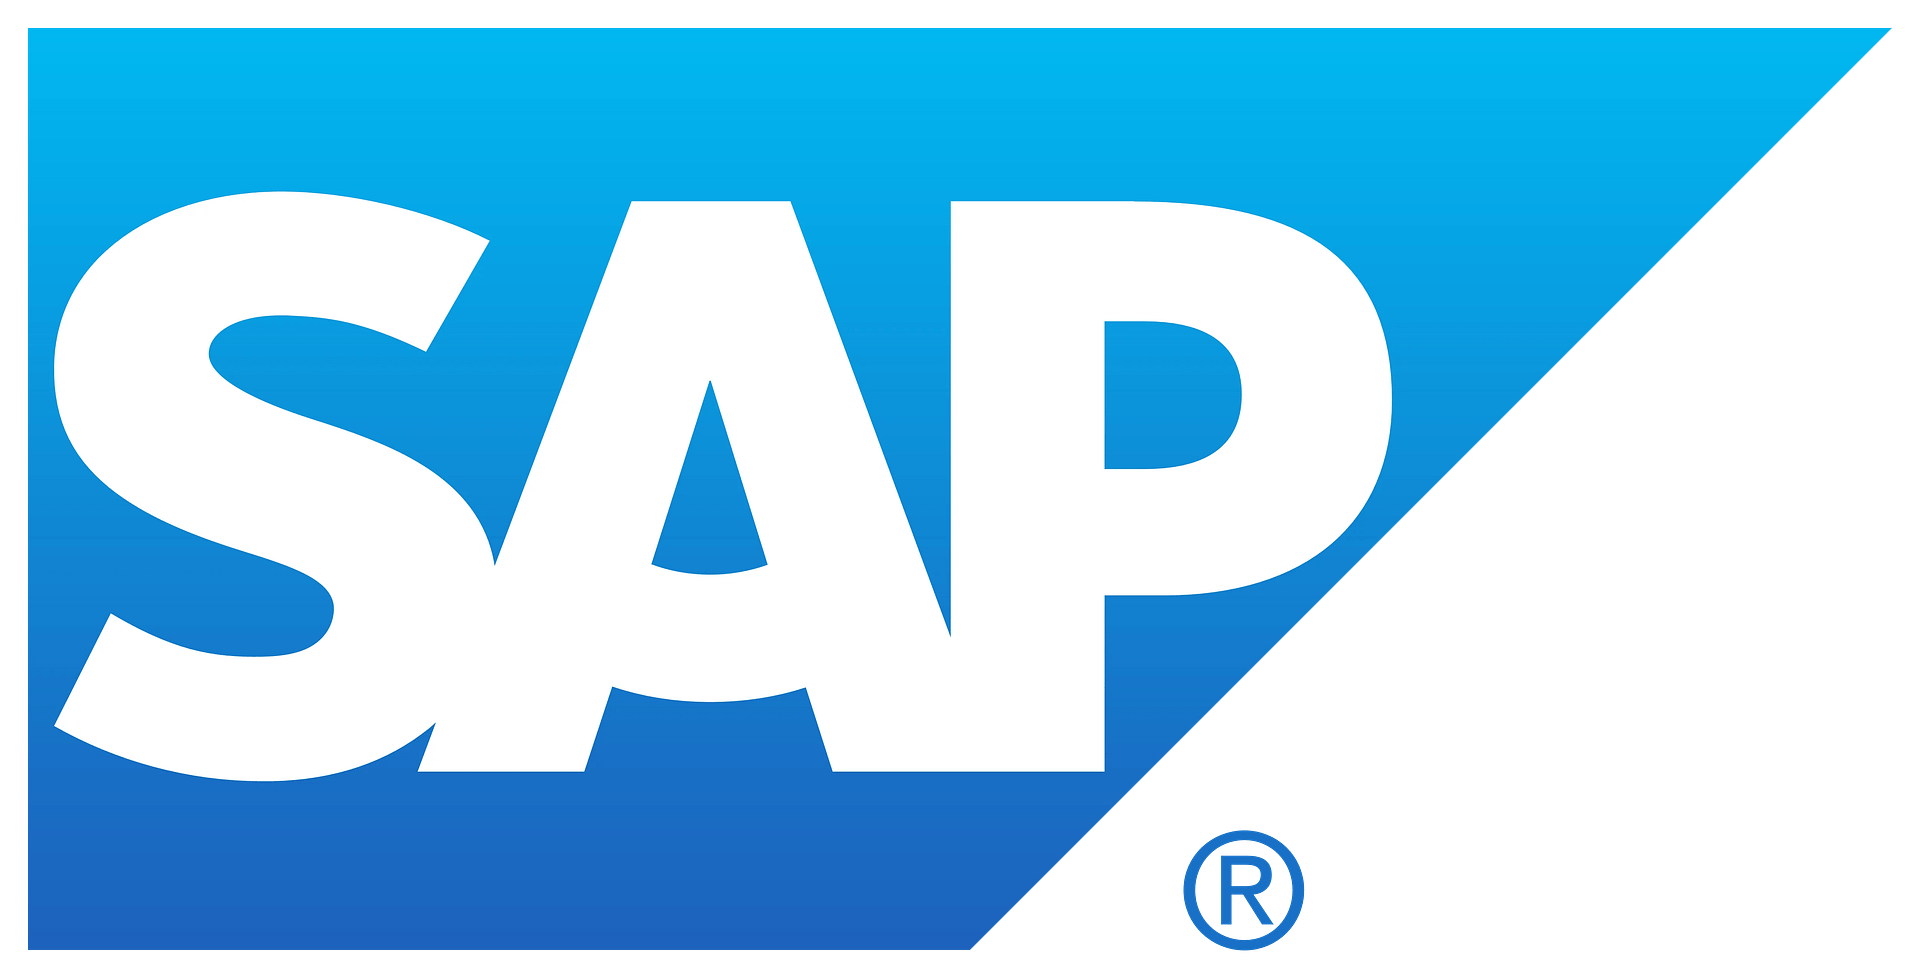 SAP SE is a German multinational software corporation based in Walldorf, Baden-Württemberg that develops enterprise software to manage business operations and customer relations. The company is especially known for its enterprise resource planning software.